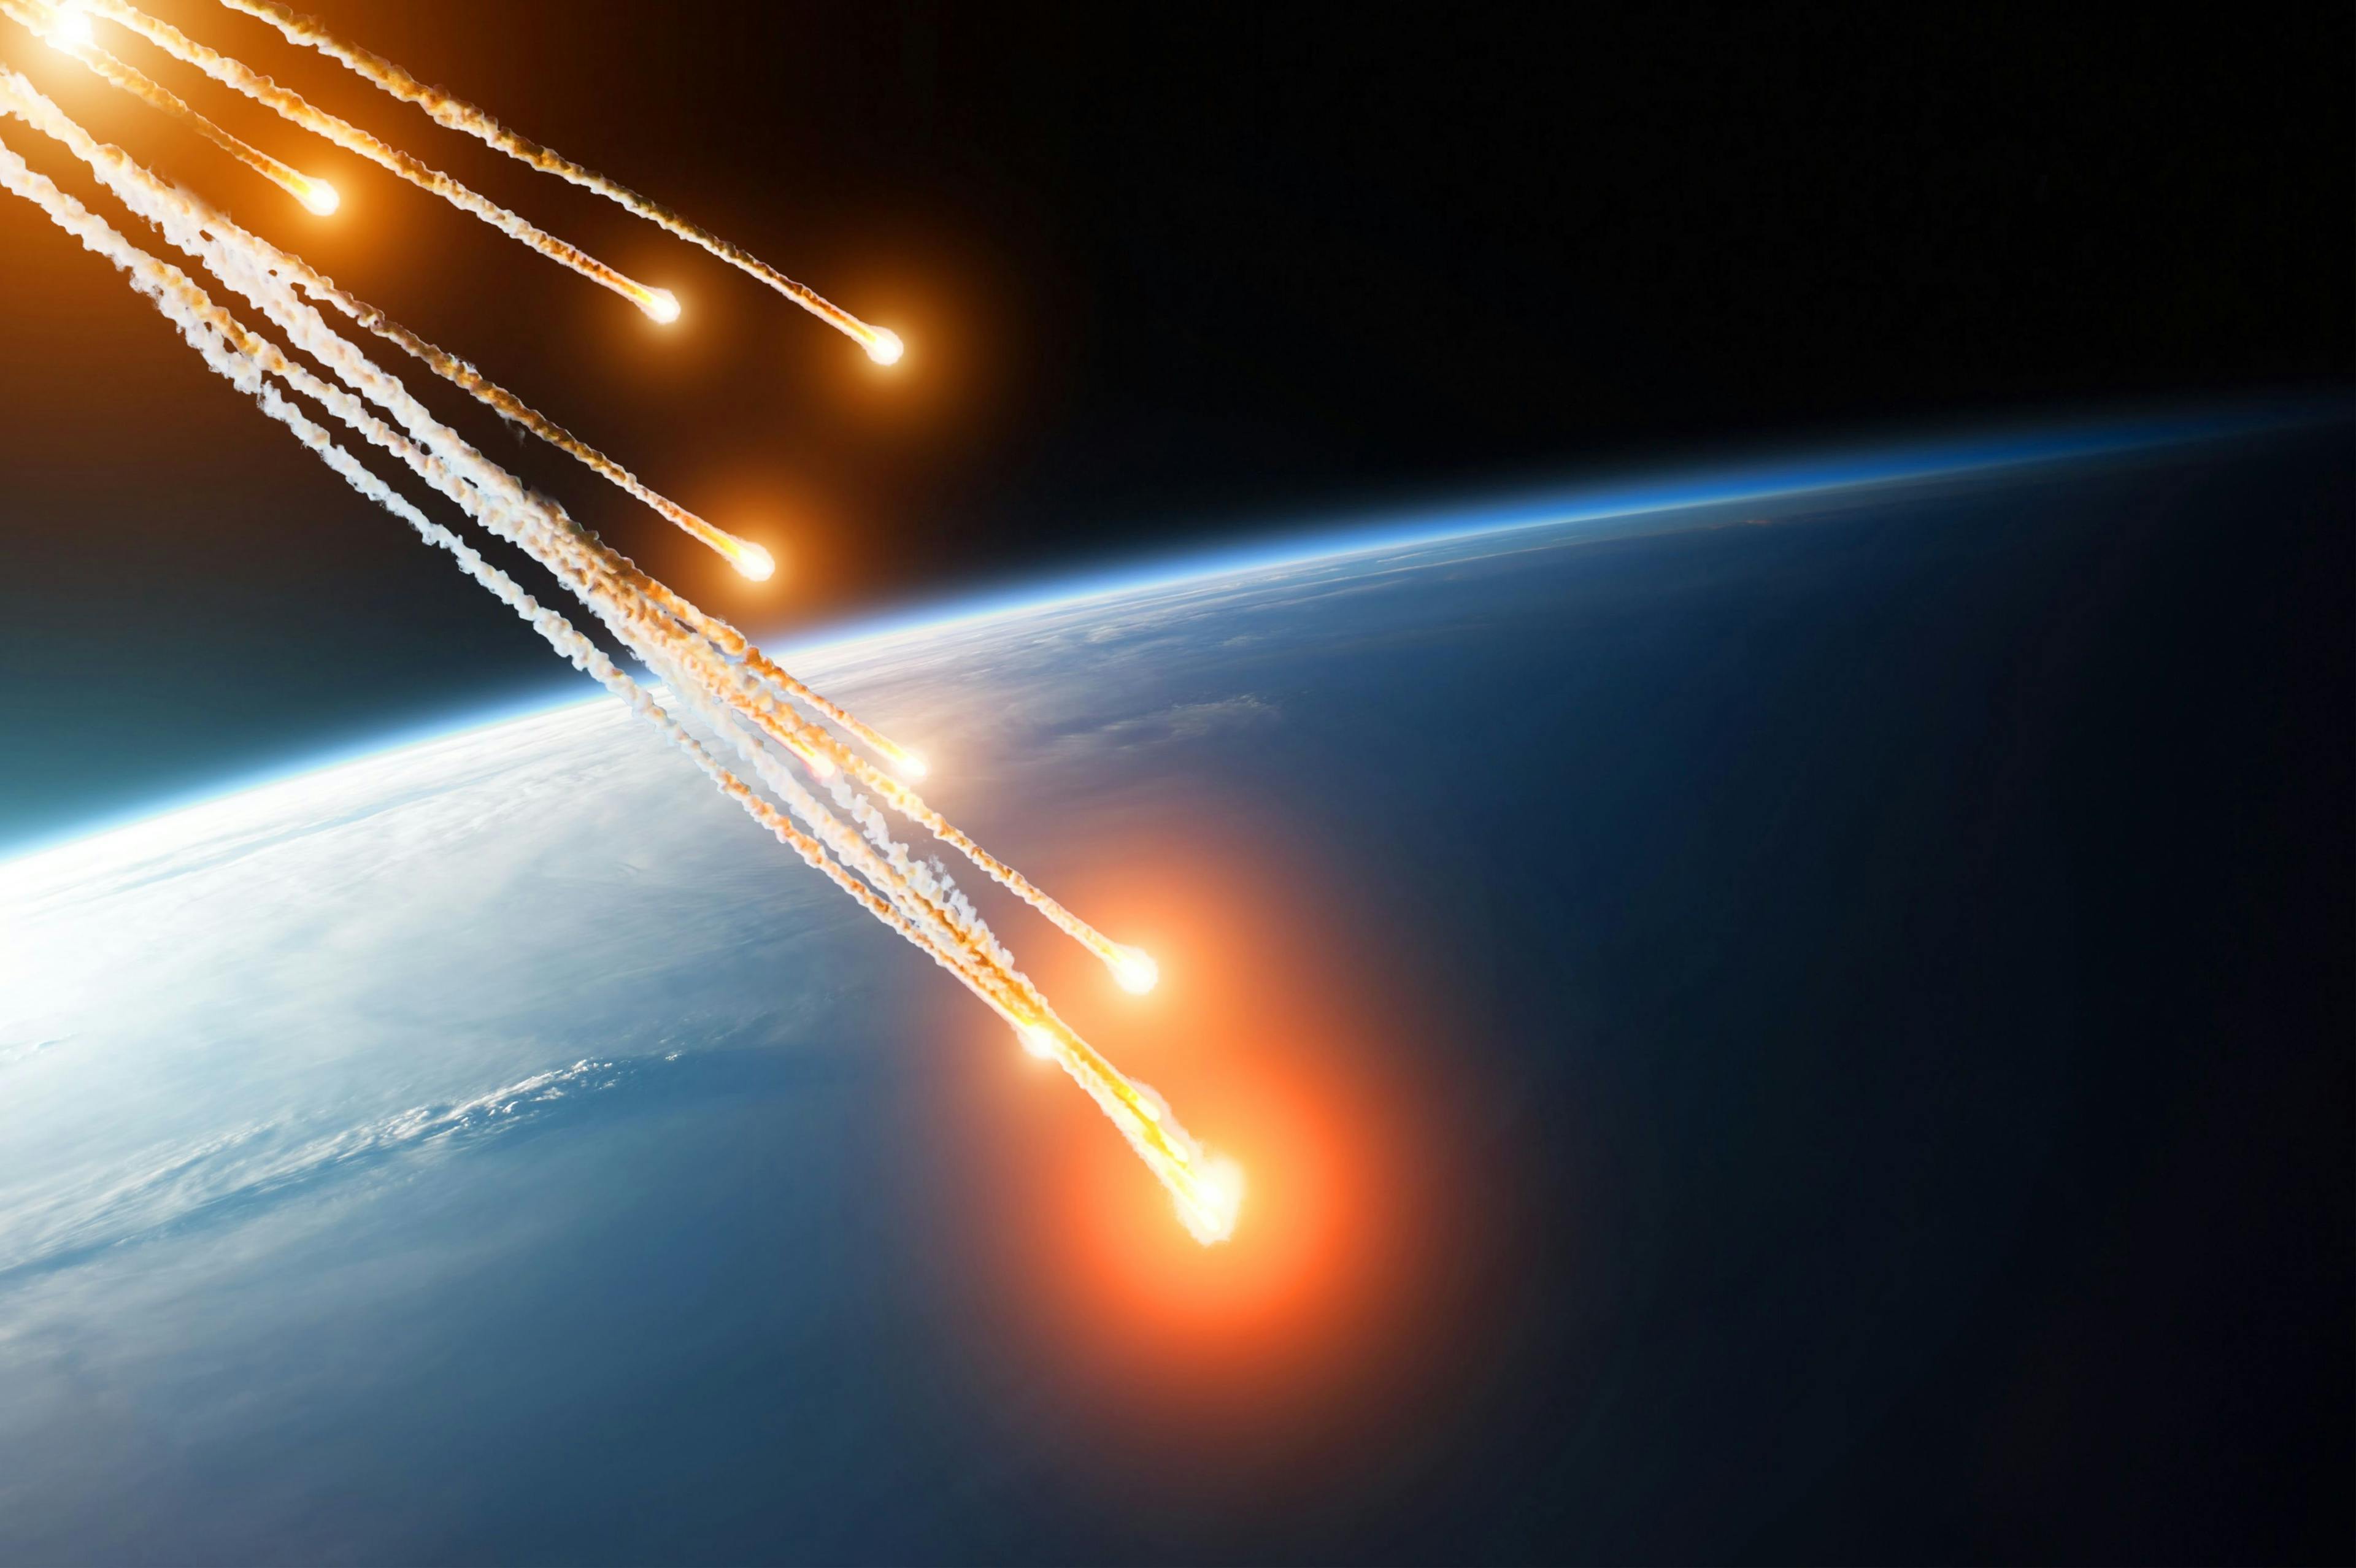 Falling burning flares of several meteorites of asteroids in the Earth's atmosphere. Elements of this image furnished by NASA. | Image Credit: © aapsky - stock.adobe.com